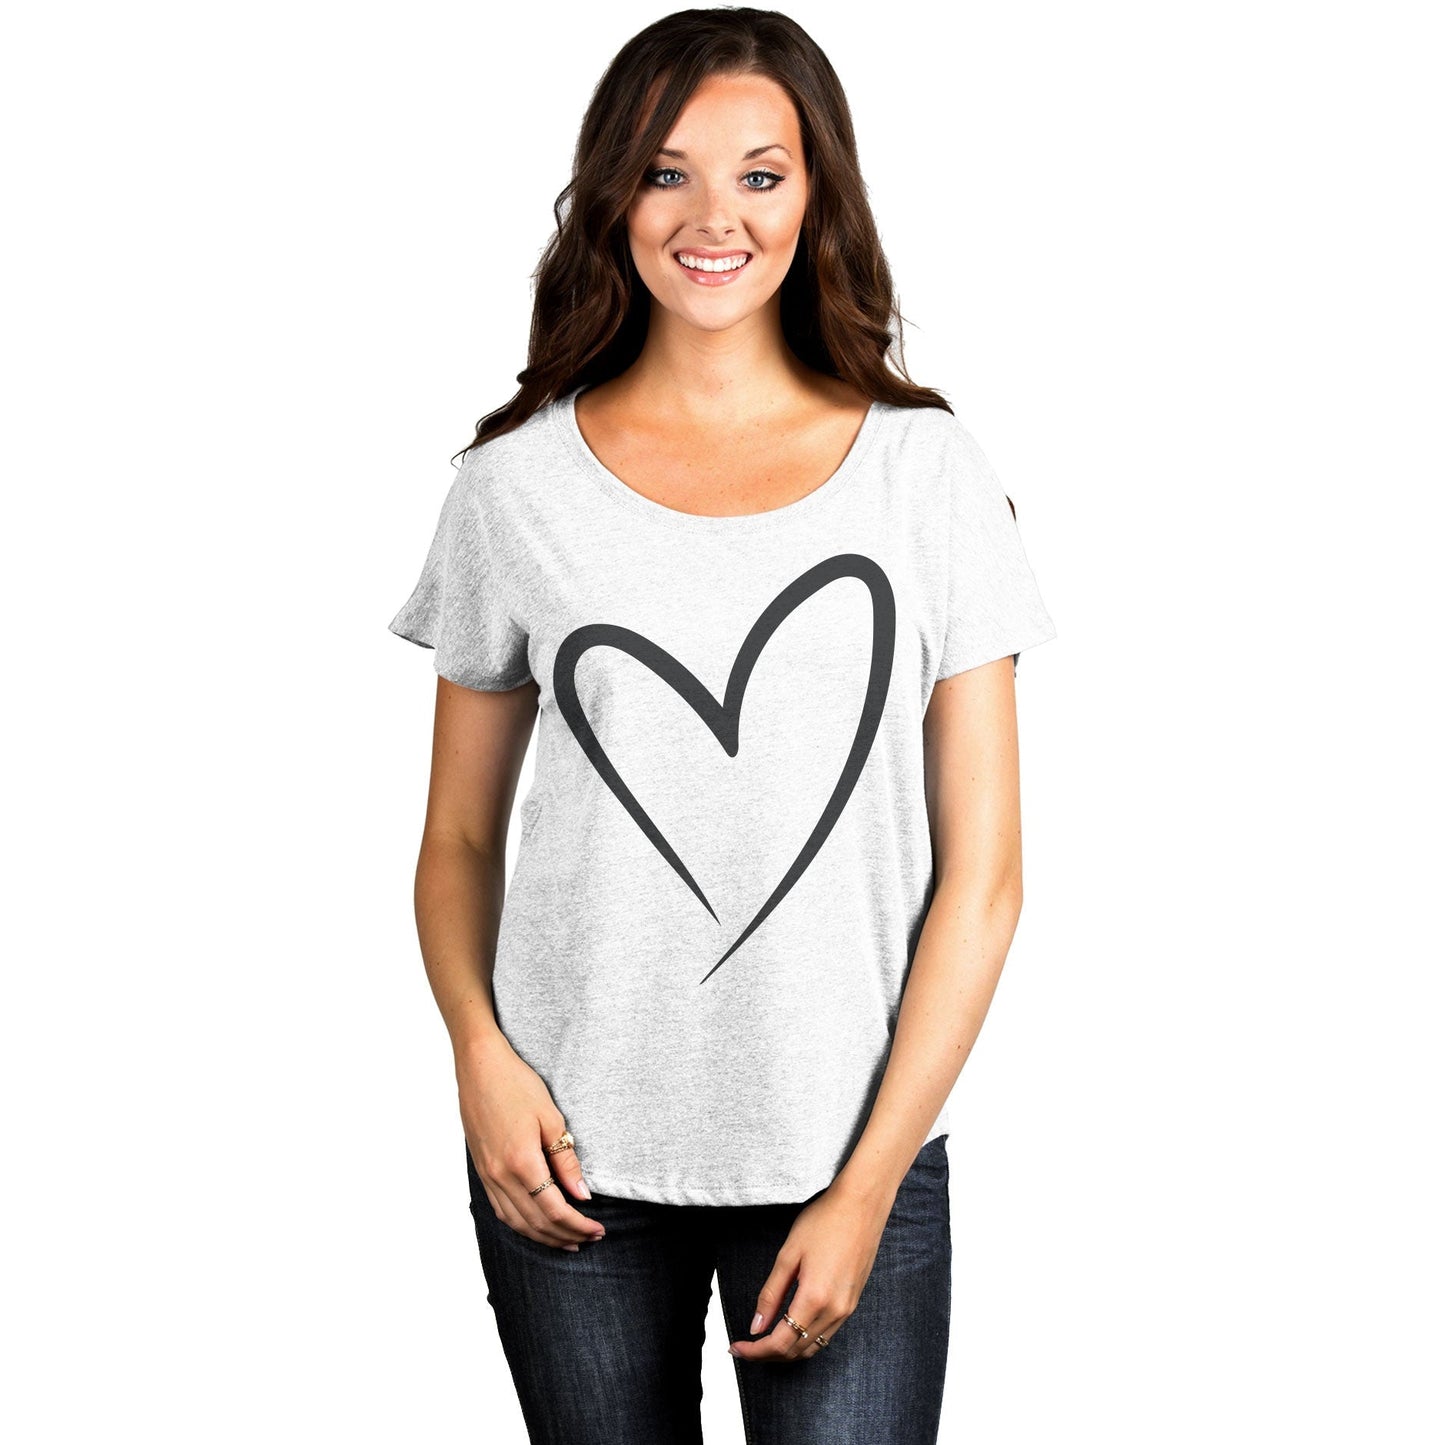 Simply Heart - Stories You Can Wear